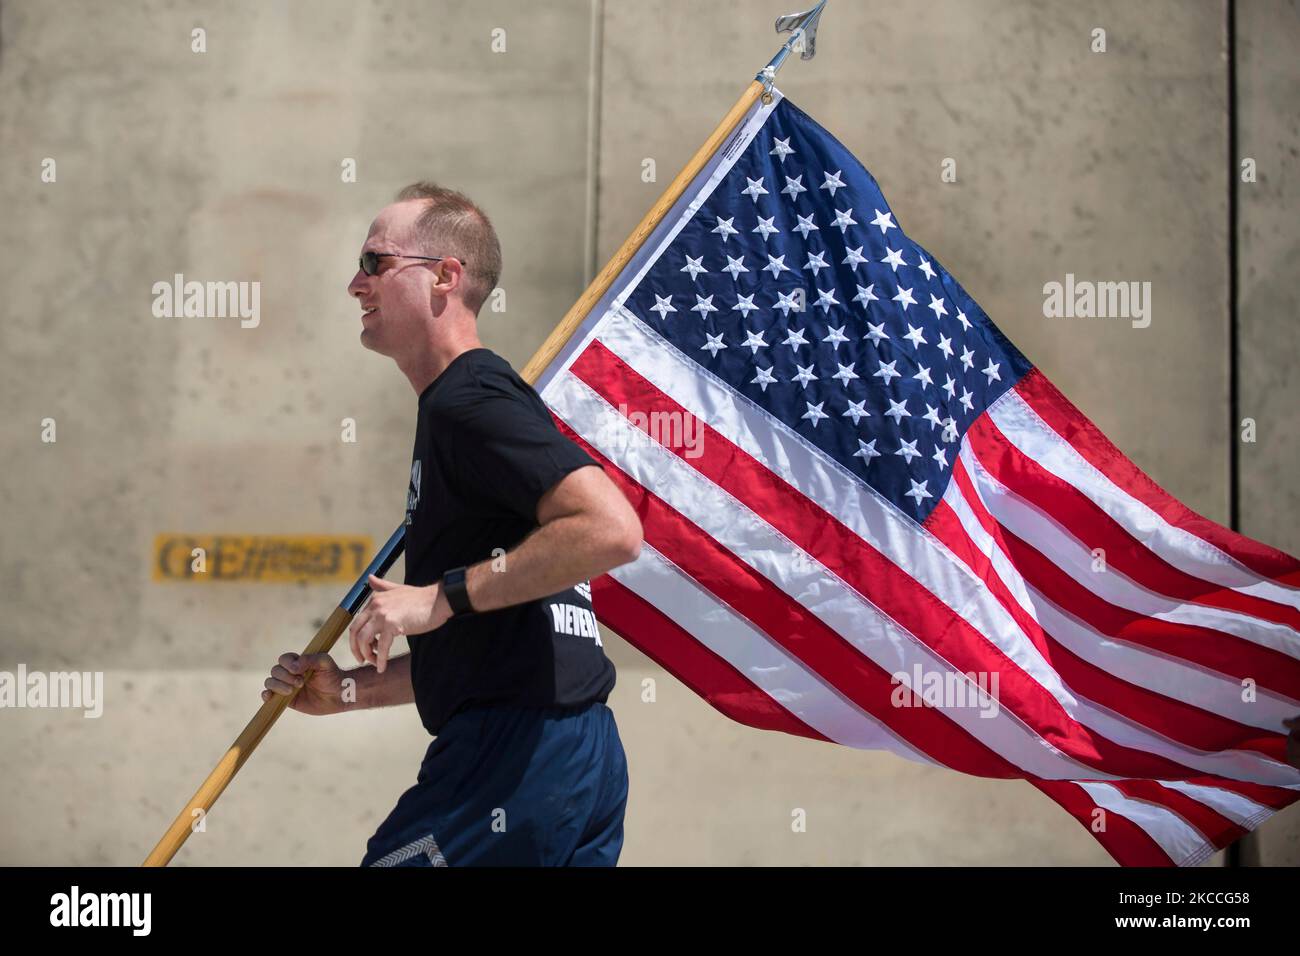 U.S. Air Force commander carries the U.S. flag while participating in a run. Stock Photo